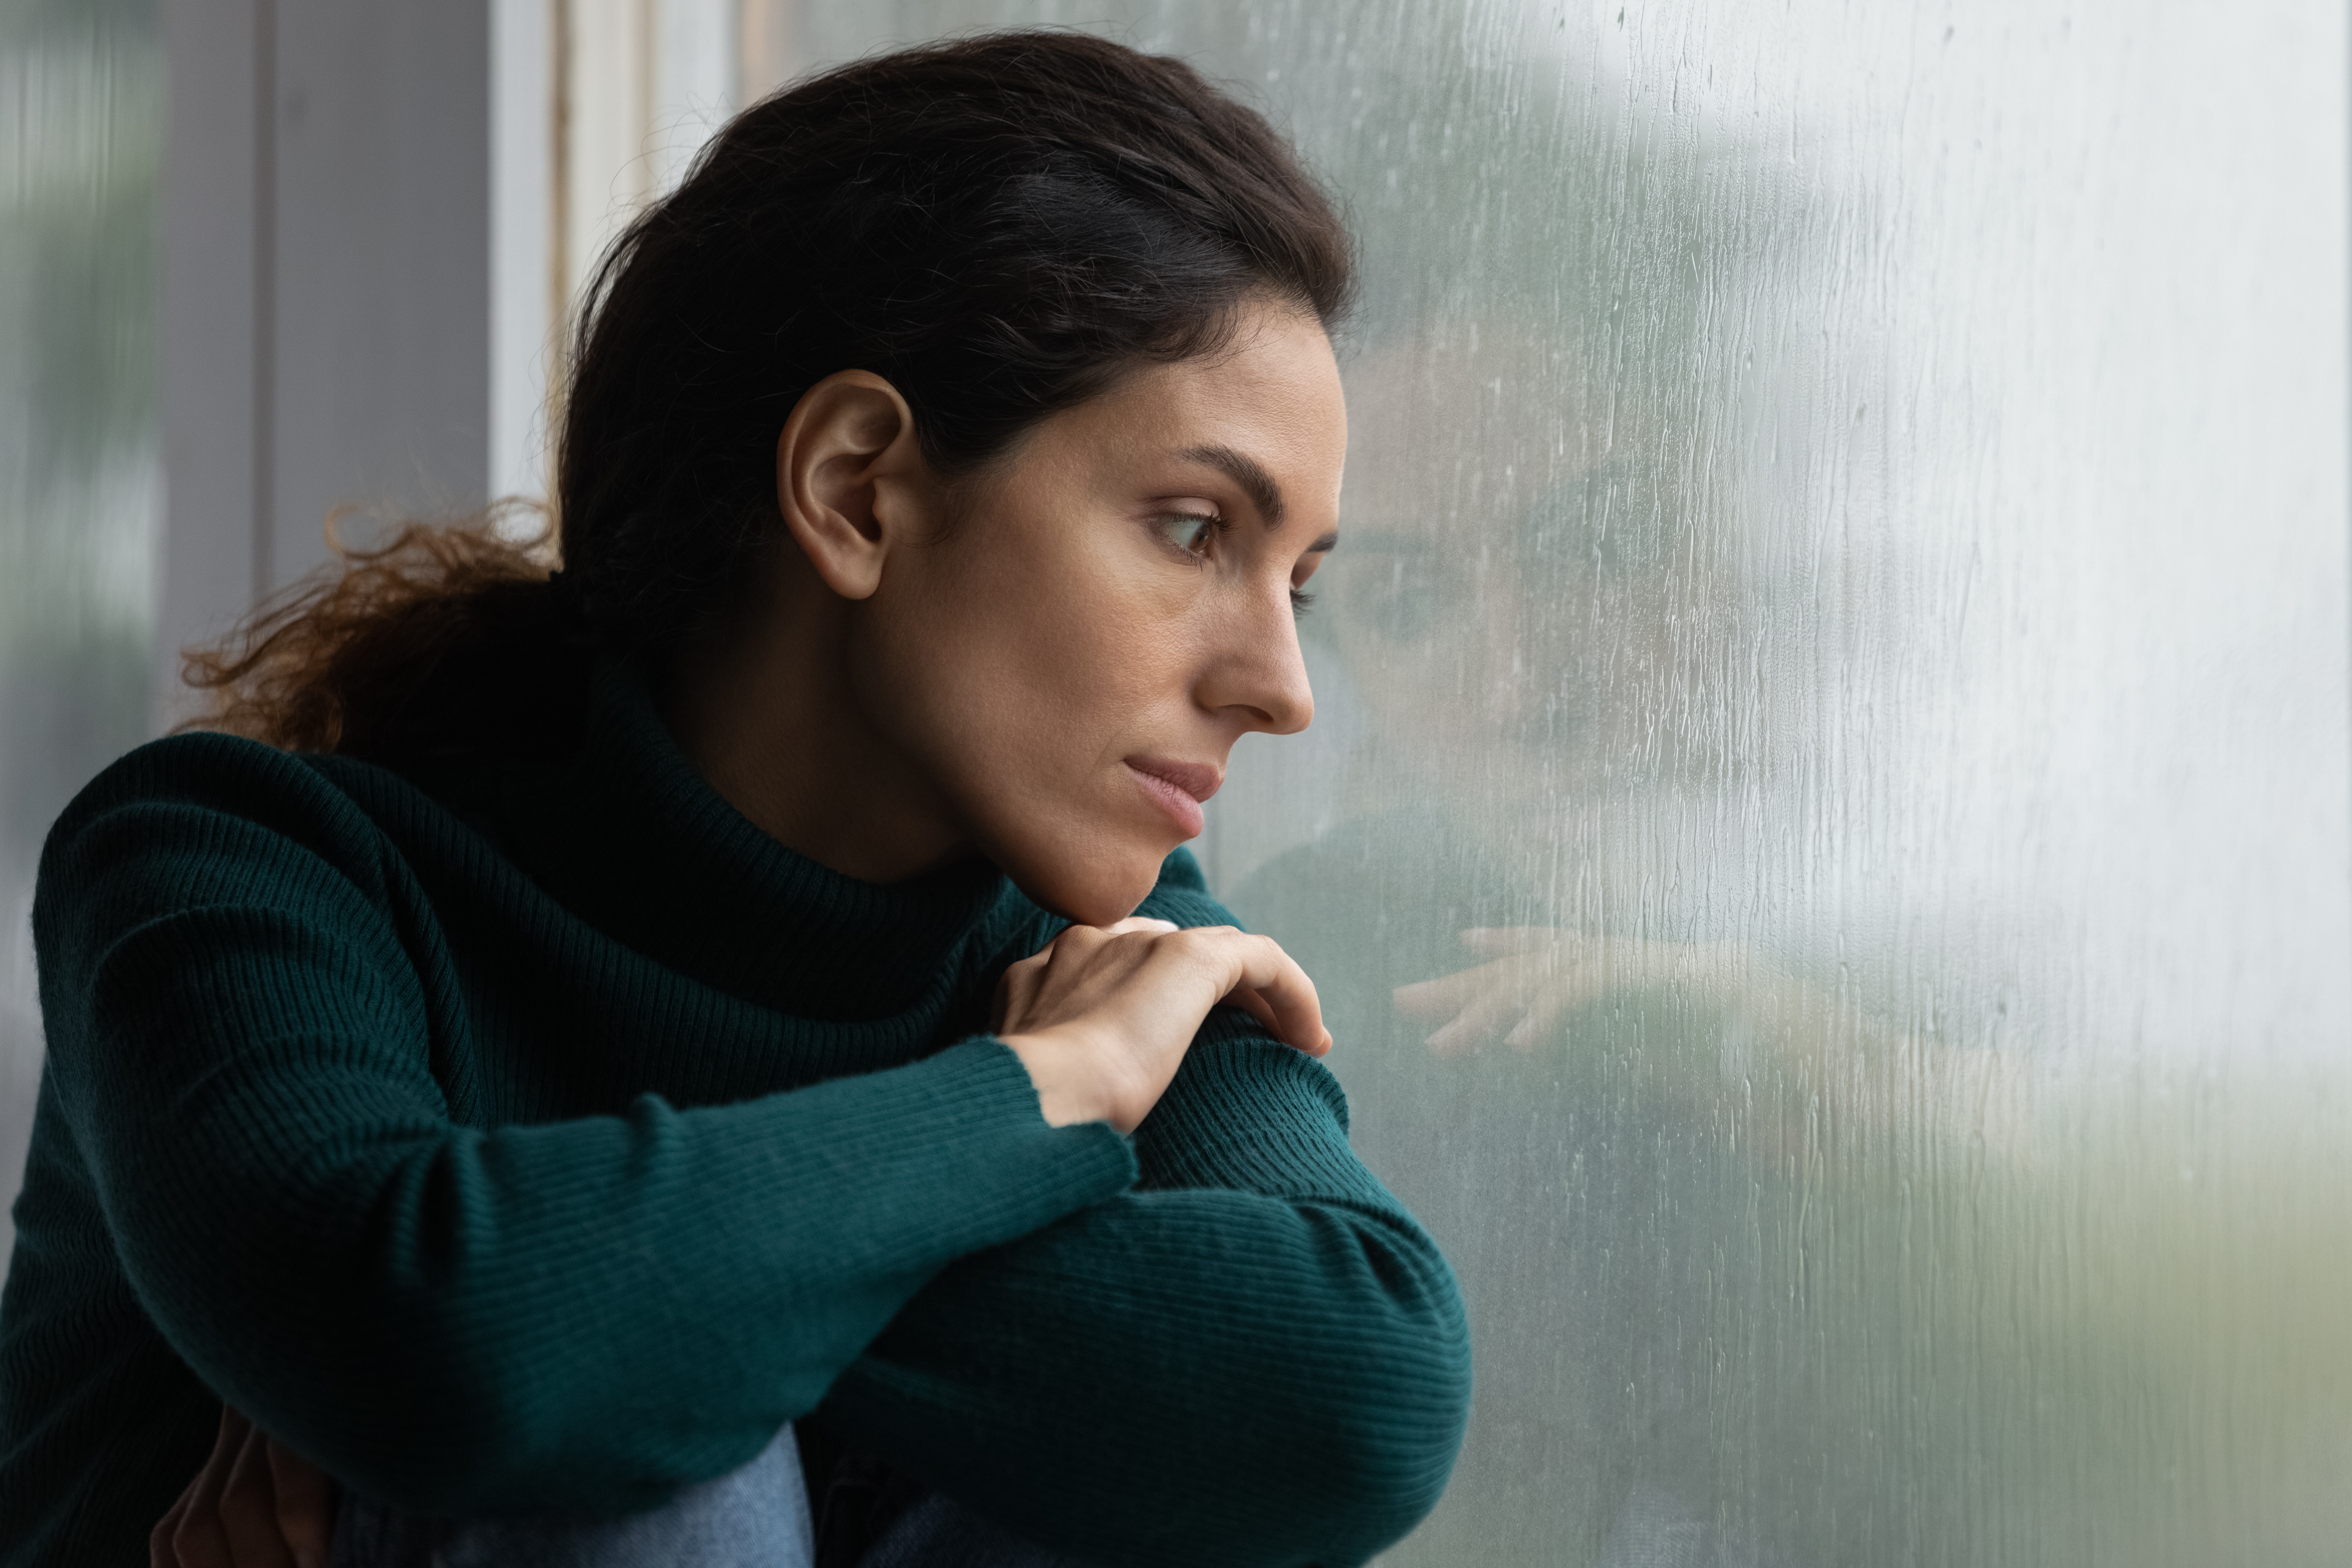 A woman in a melancholic mood looking out the window. | Source: Getty Images